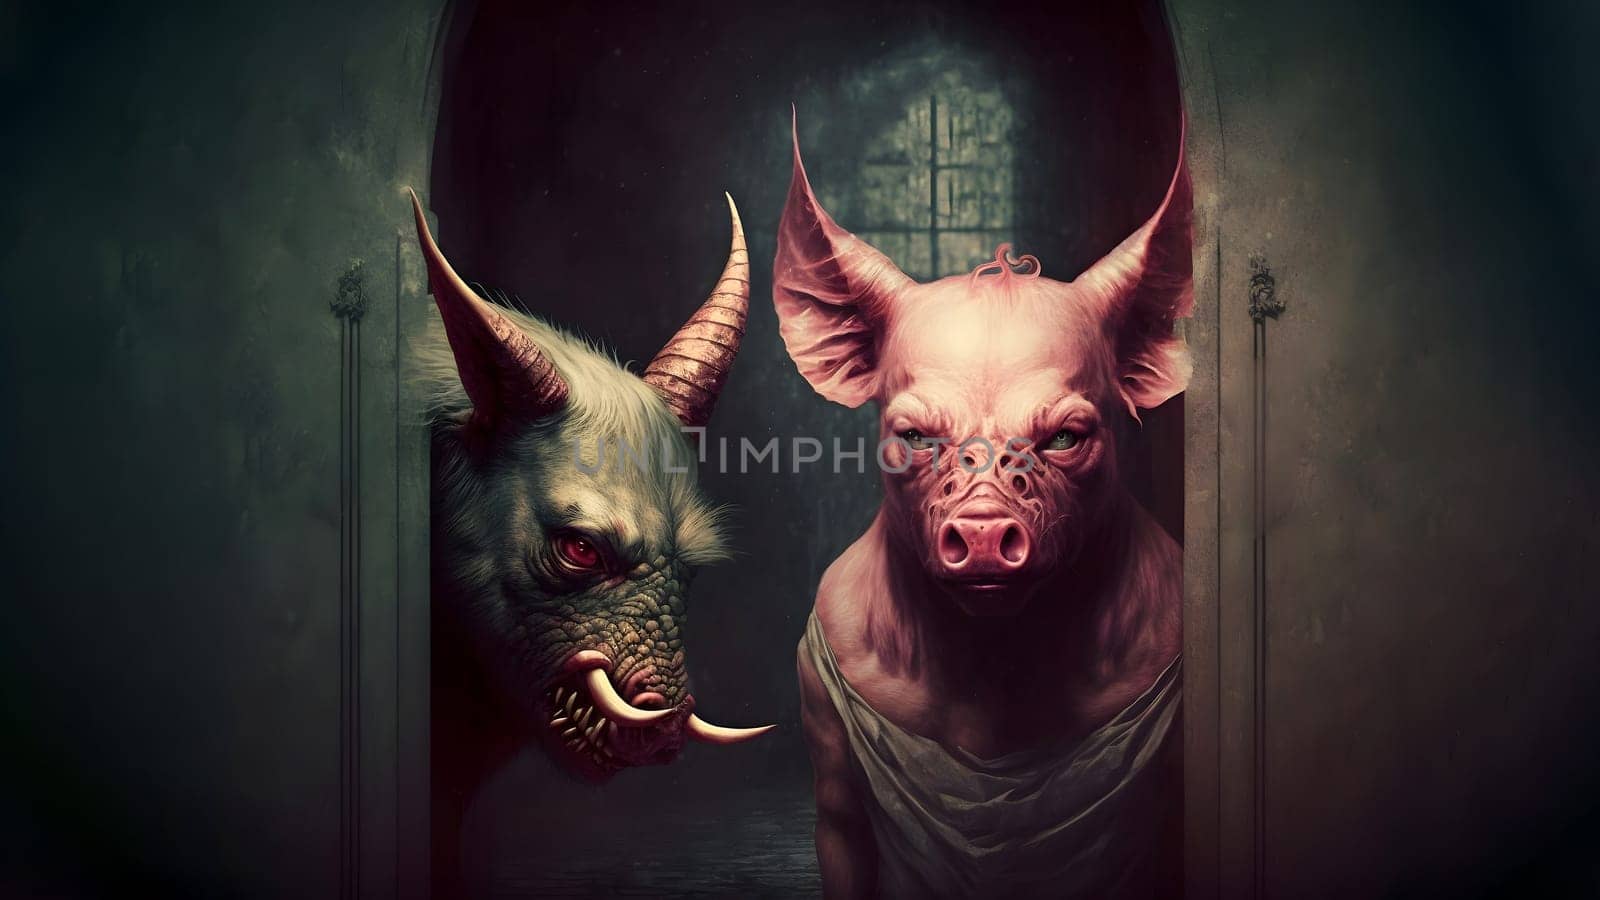 hellish satans underswine, neural network generated art. Digitally generated image. Not based on any actual person, scene or pattern.